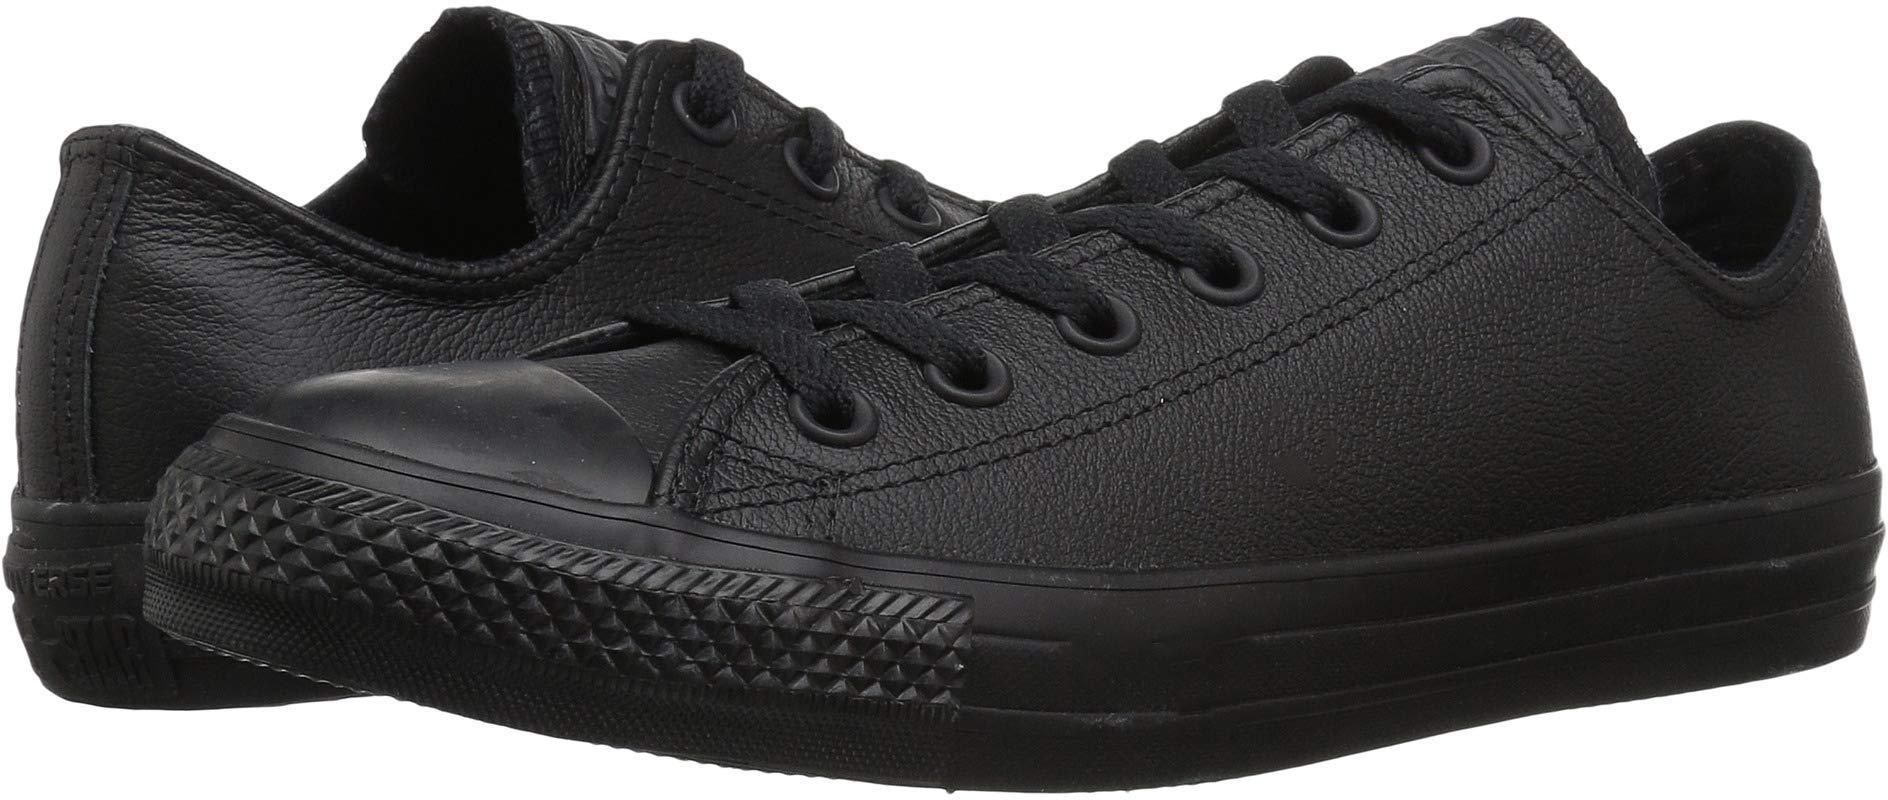 Converse Chuck Taylor® All Star® Leather Ox